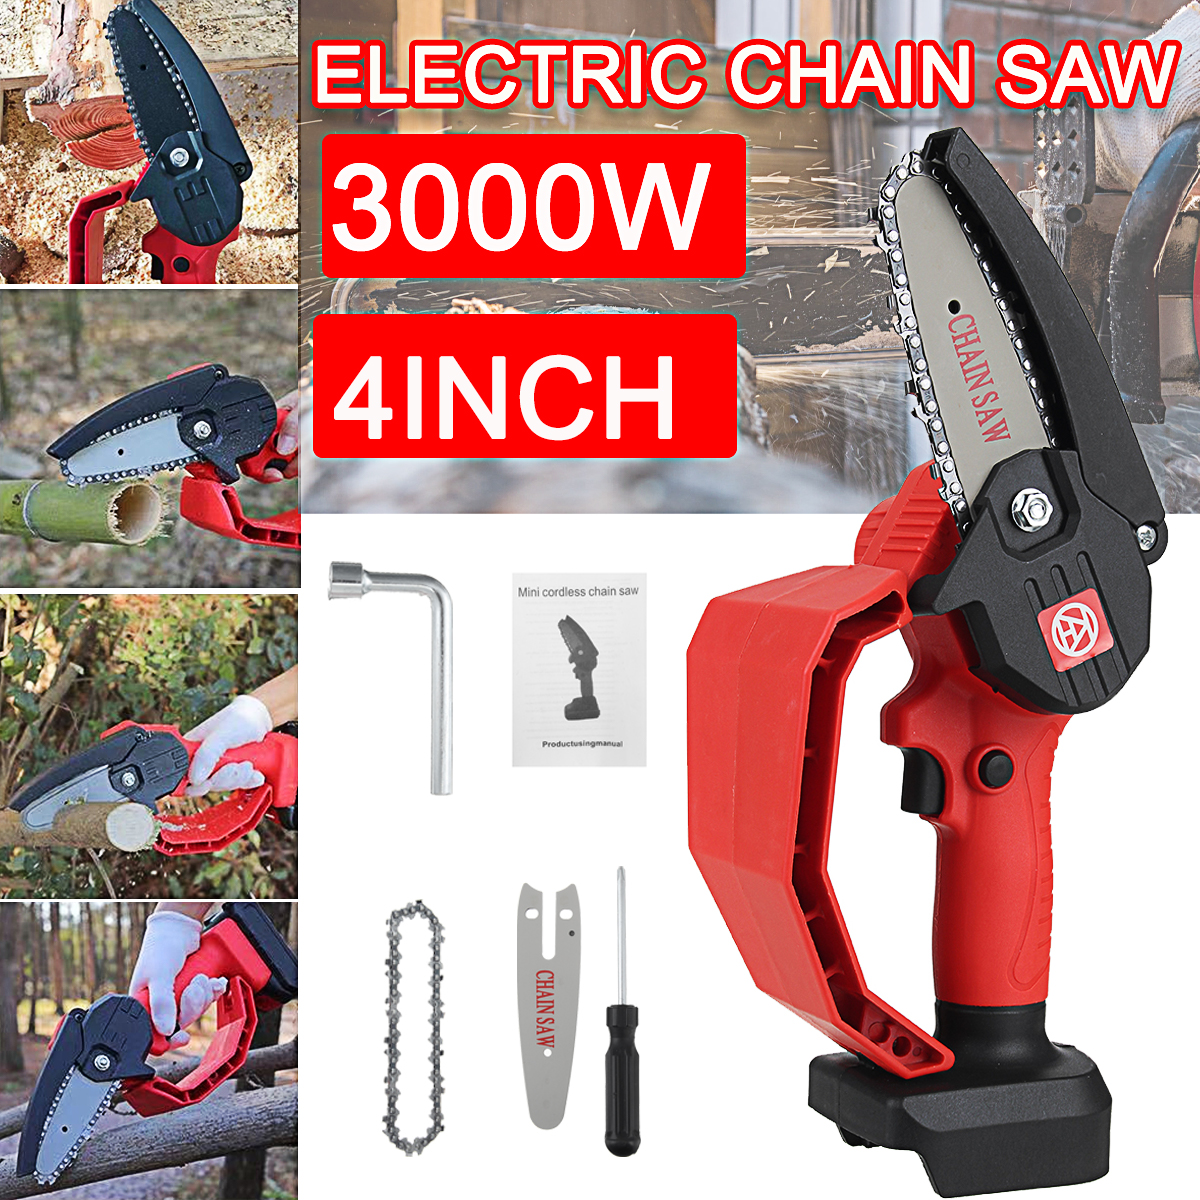 3000W-4-Inch-Electric-Chain-Saw-Portable-One-Hand-Saw-Carpentry-Mini-chainsaw-Garden-Tool-For-Makita-1878451-1